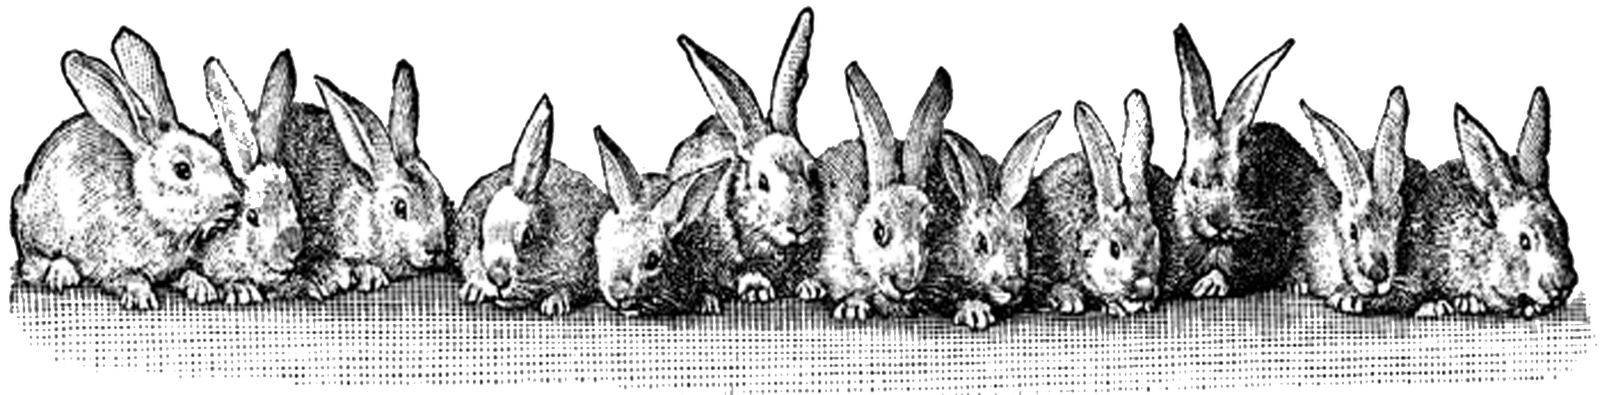 10-109947_3-easter-bunnies-in-a-row-free